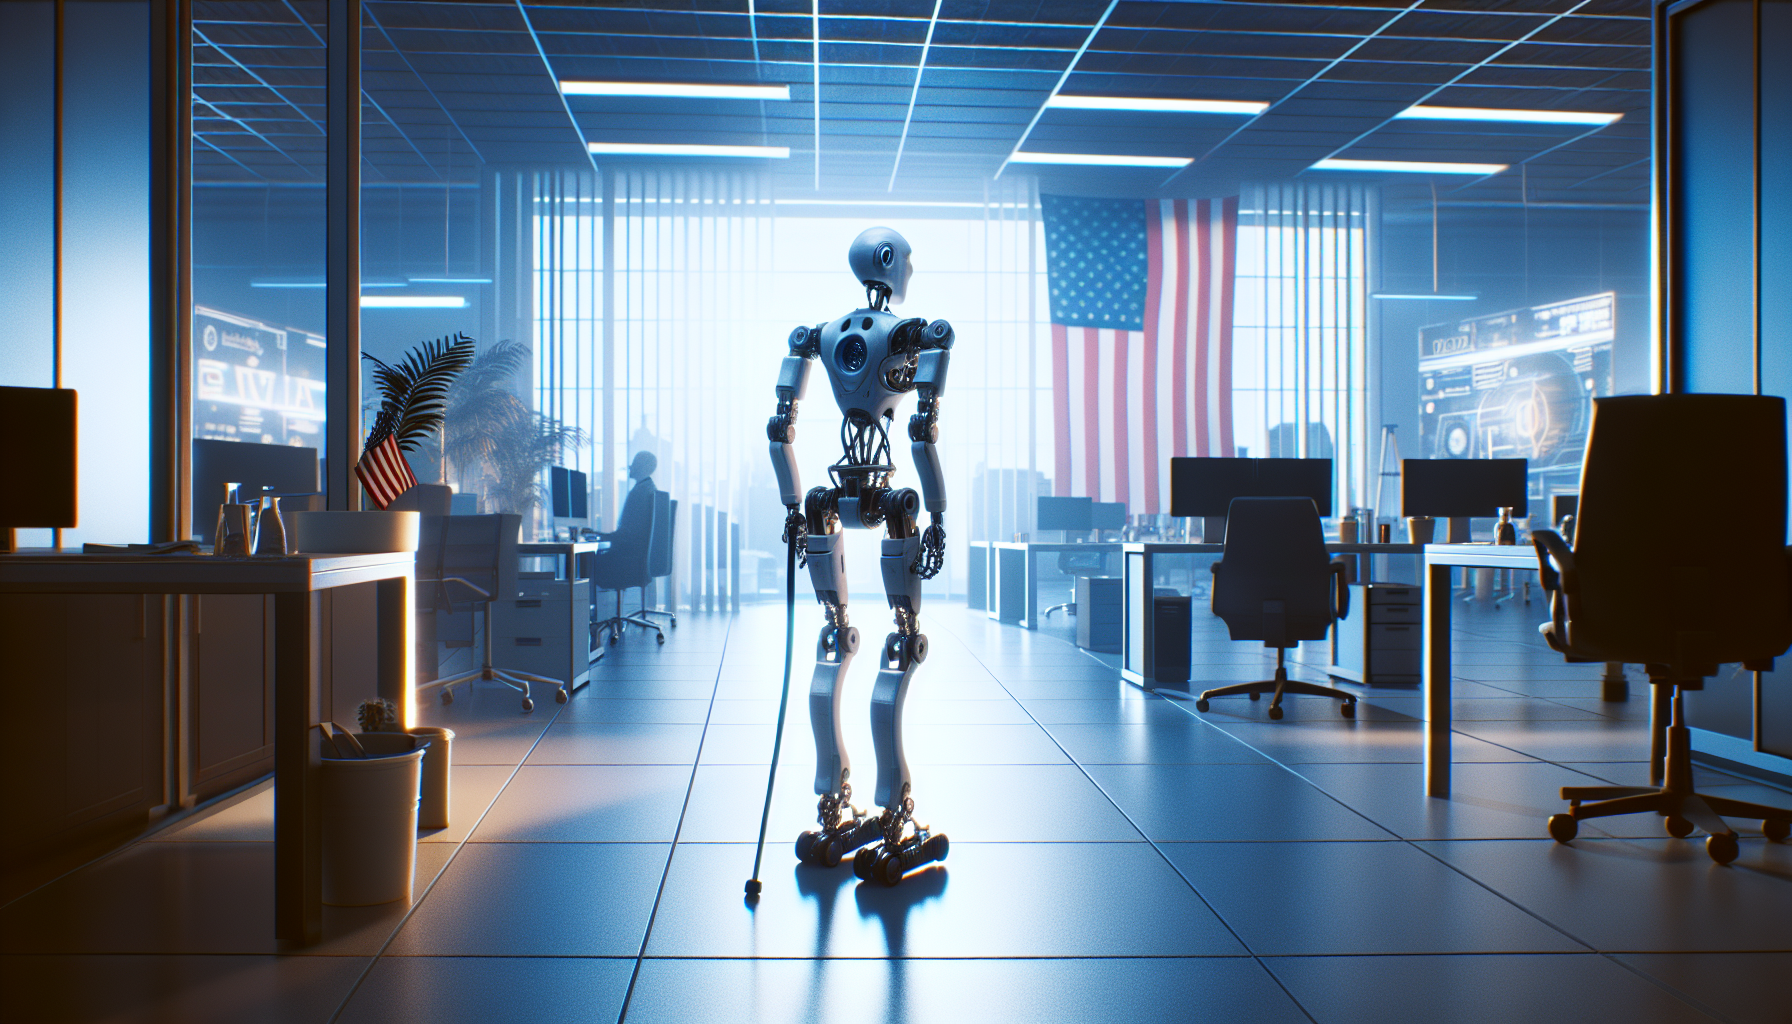 After the morning announcement, Boston Dynamics' bipedal Atlas Robot is set to retire.